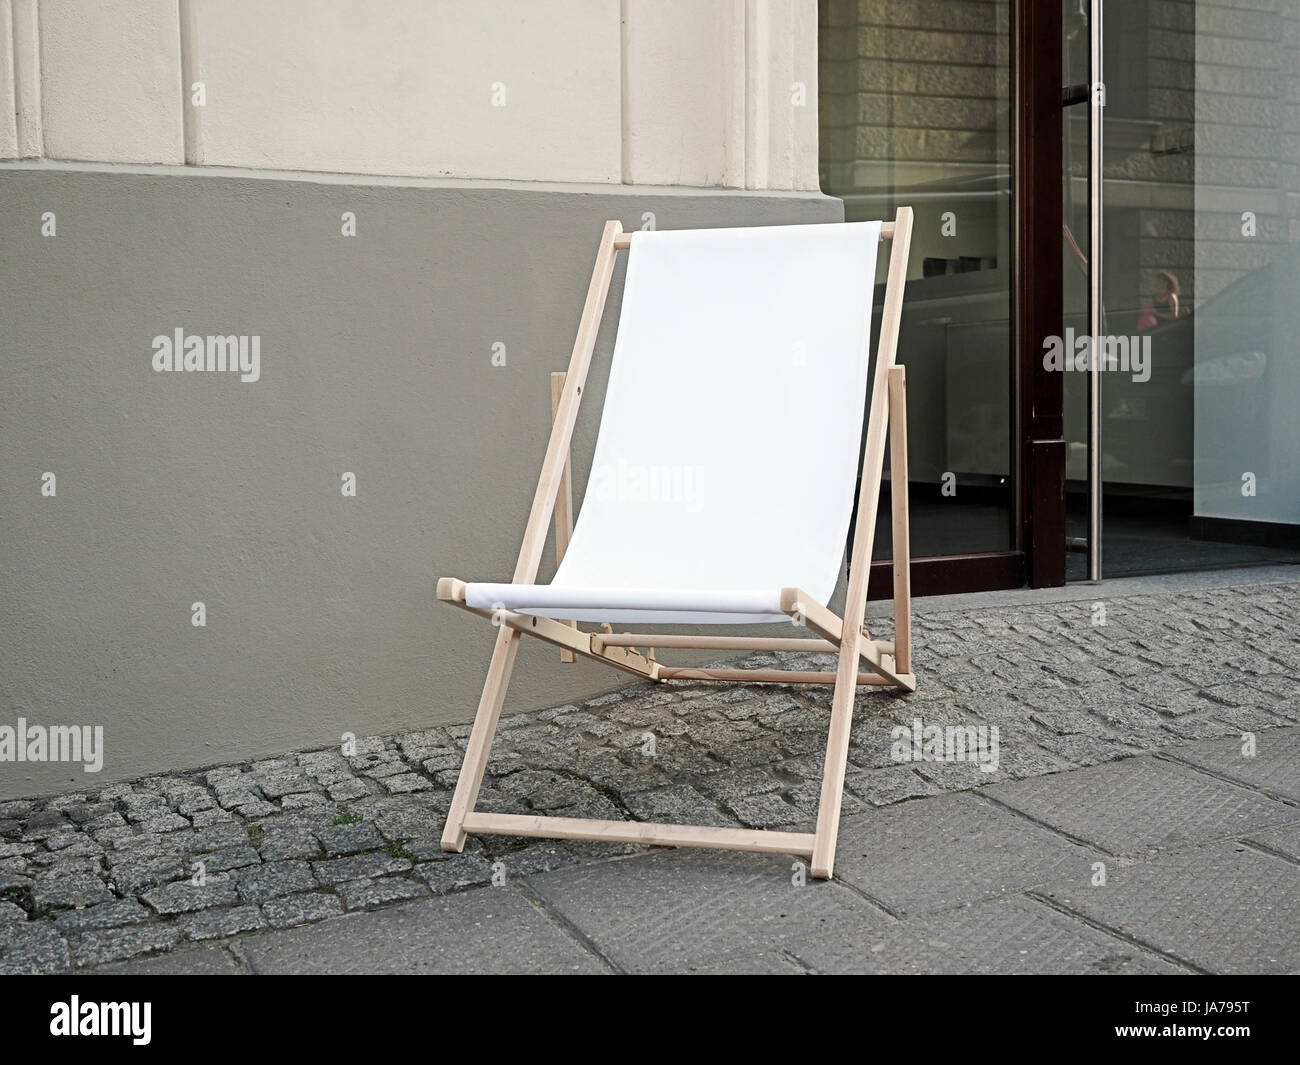 Sunbed, deck chair in a front of a shop on a pedestrian path in the old town Stock Photo